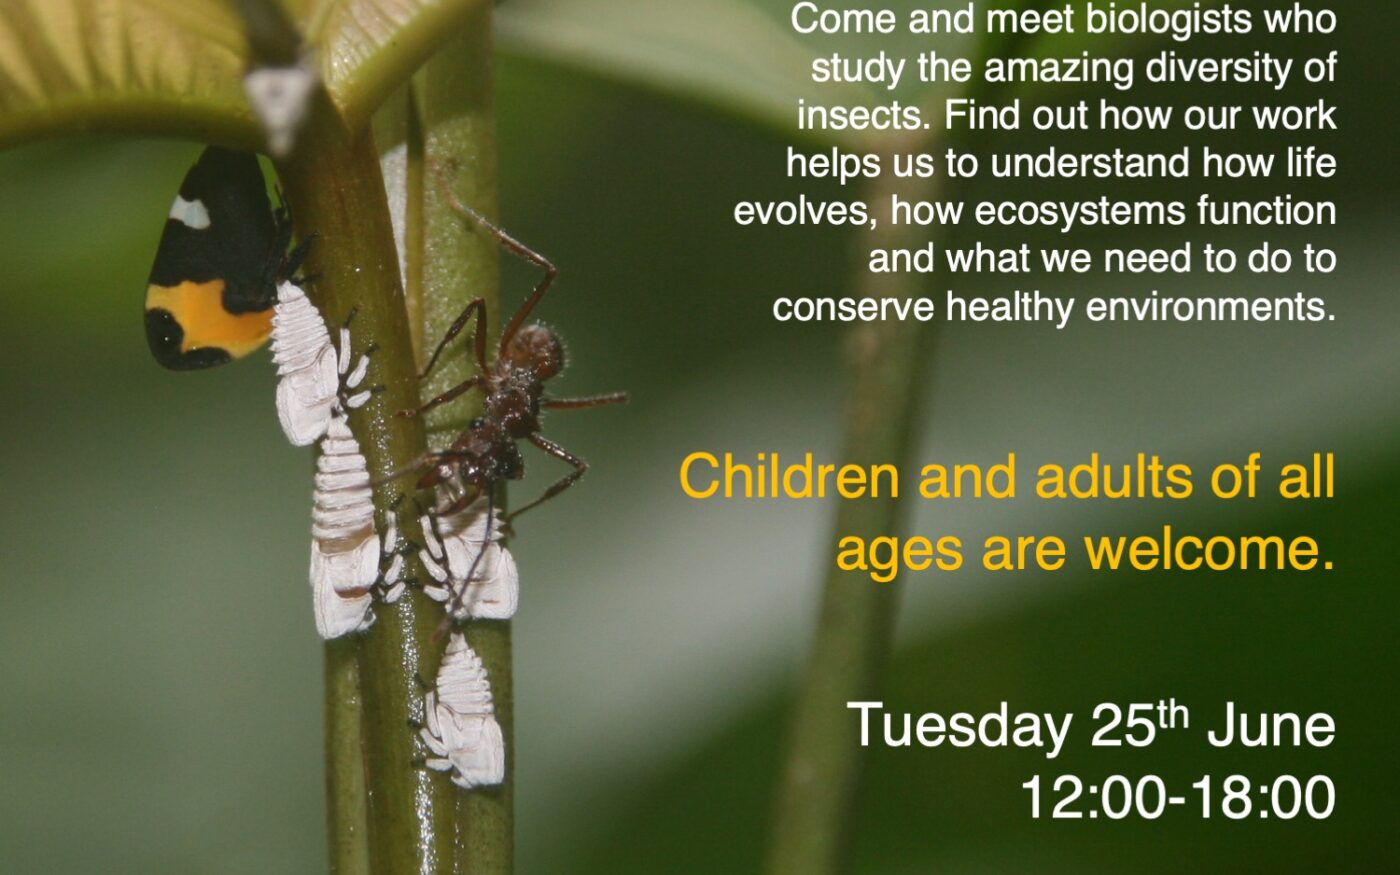 A poster of ants interacting with leaf hoppers, with information about the event.